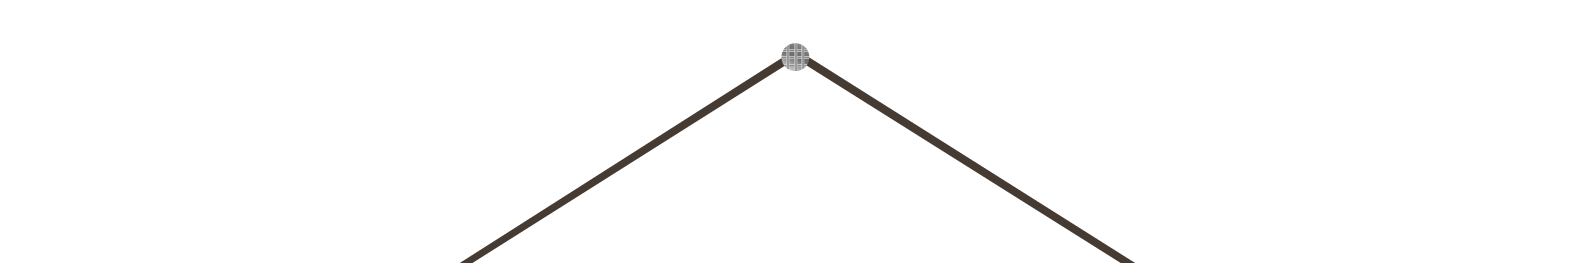 frame-wire-pin